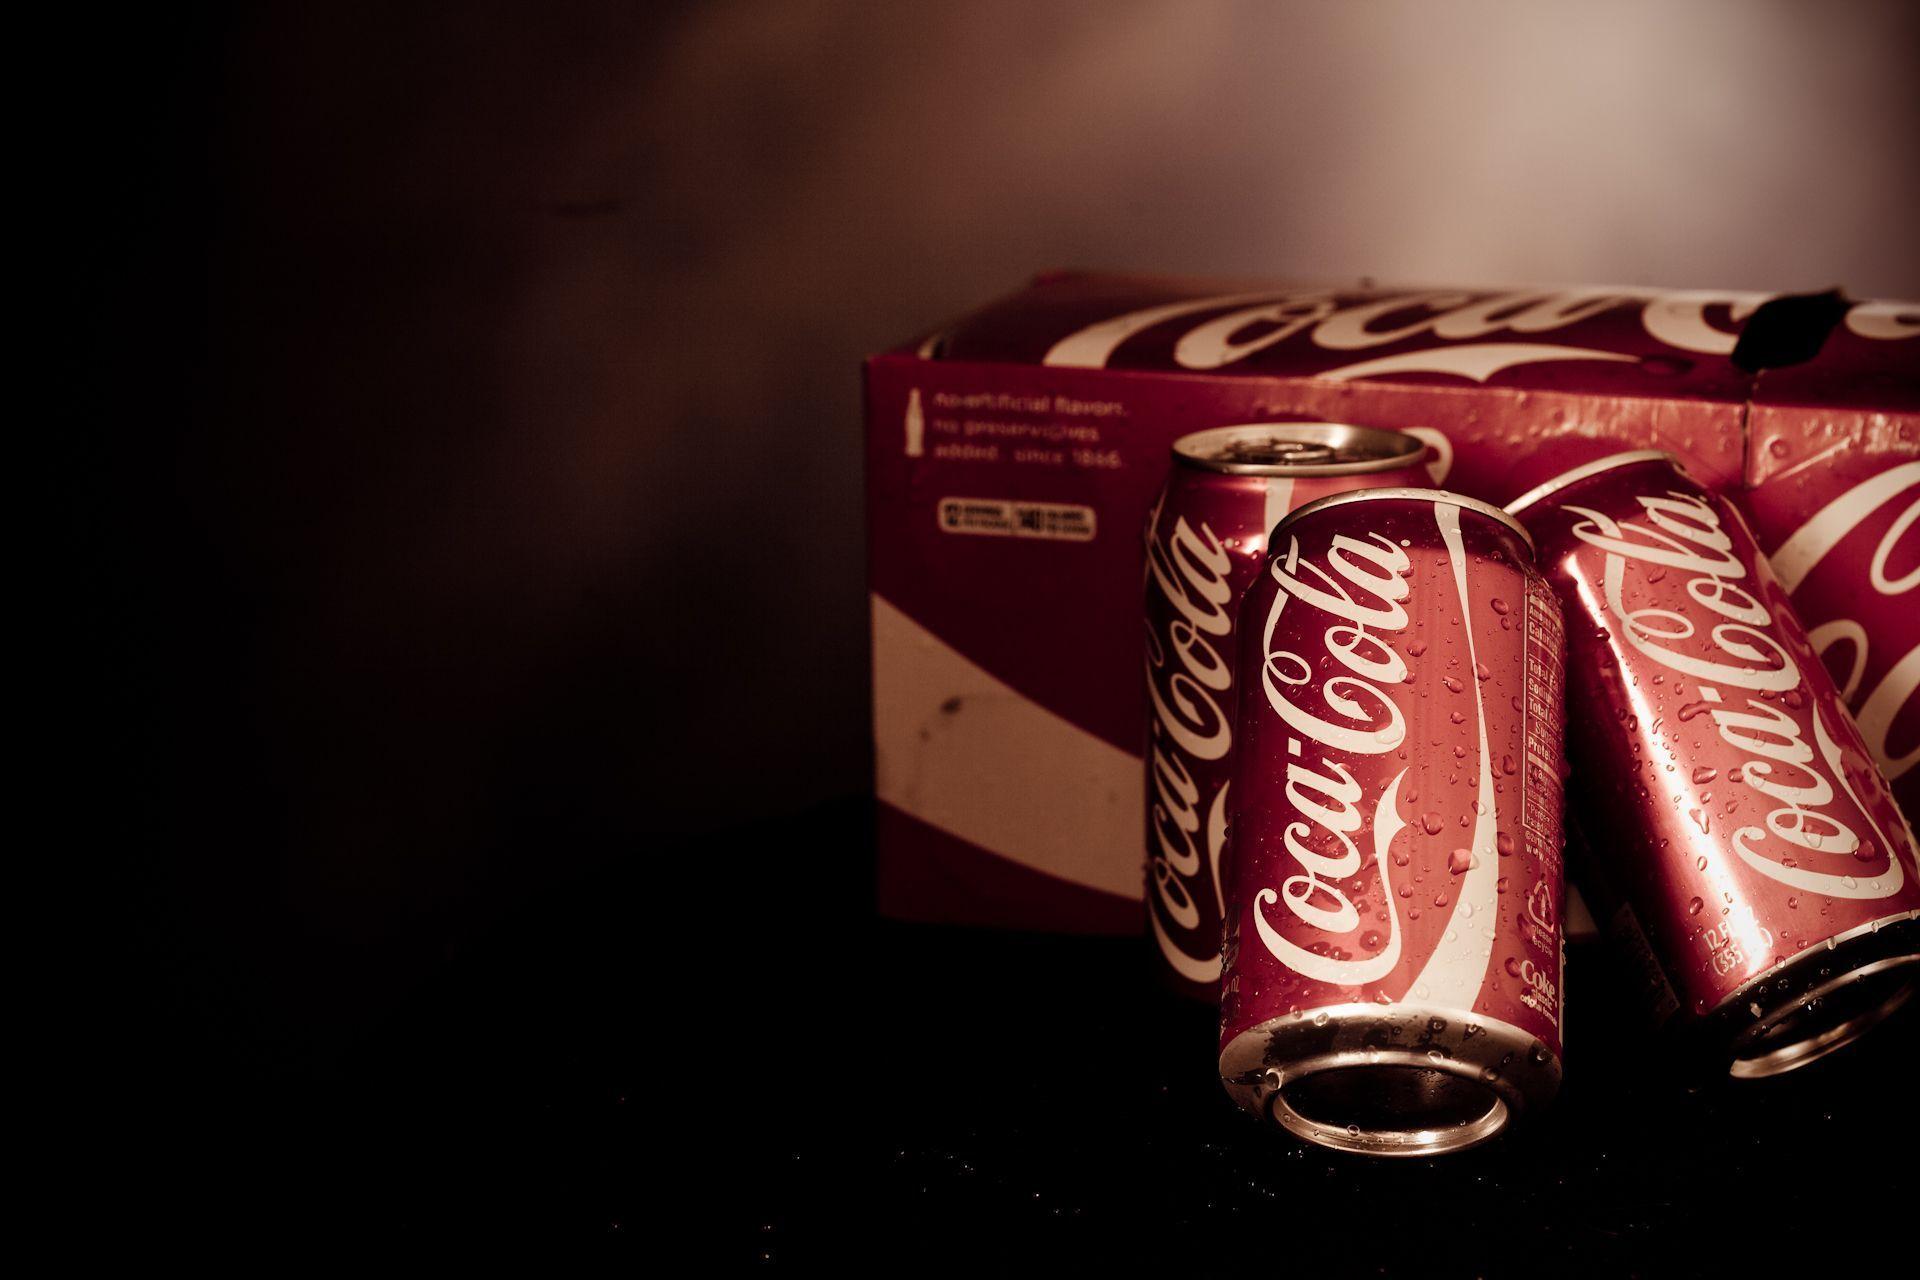 Quality Image of Coca Cola › 1920x1280 for PC & Mac, Laptop, Tablet